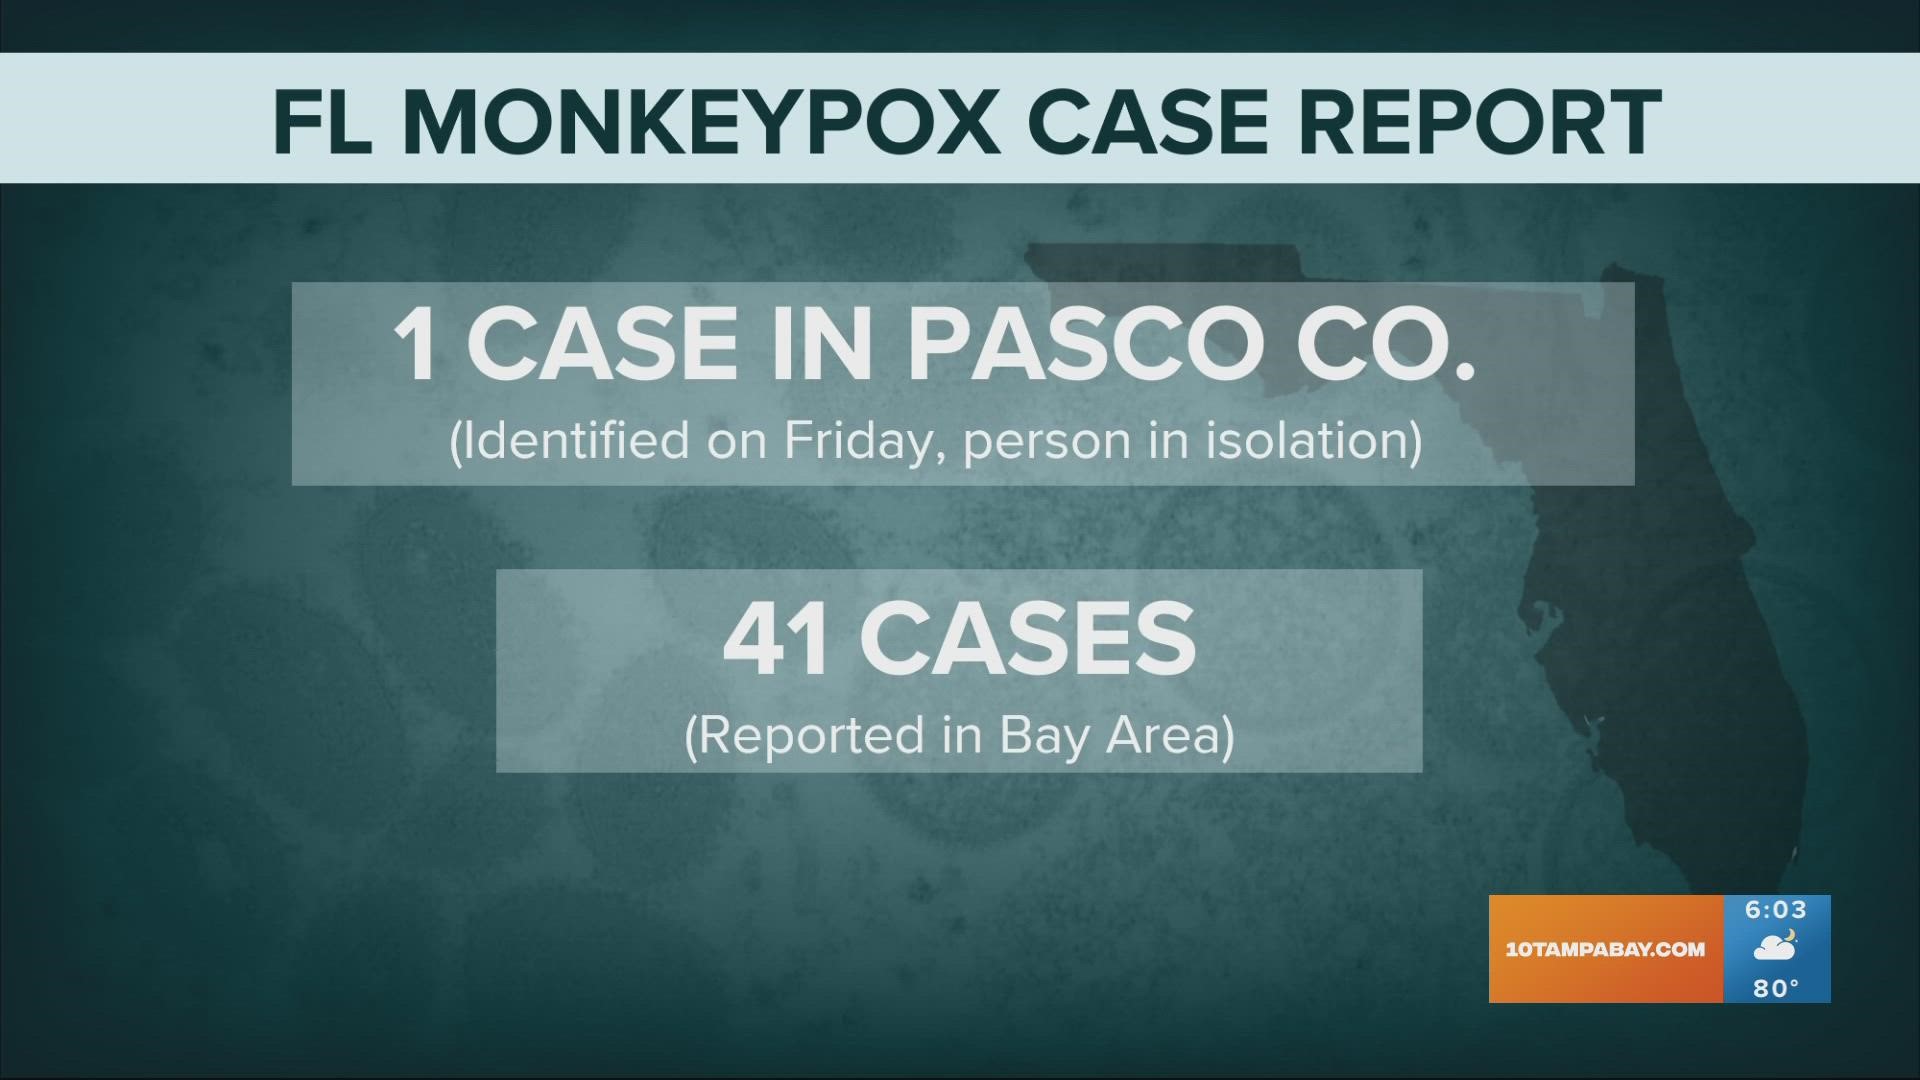 So far in the Tampa Bay area, 41 cases have been reported.